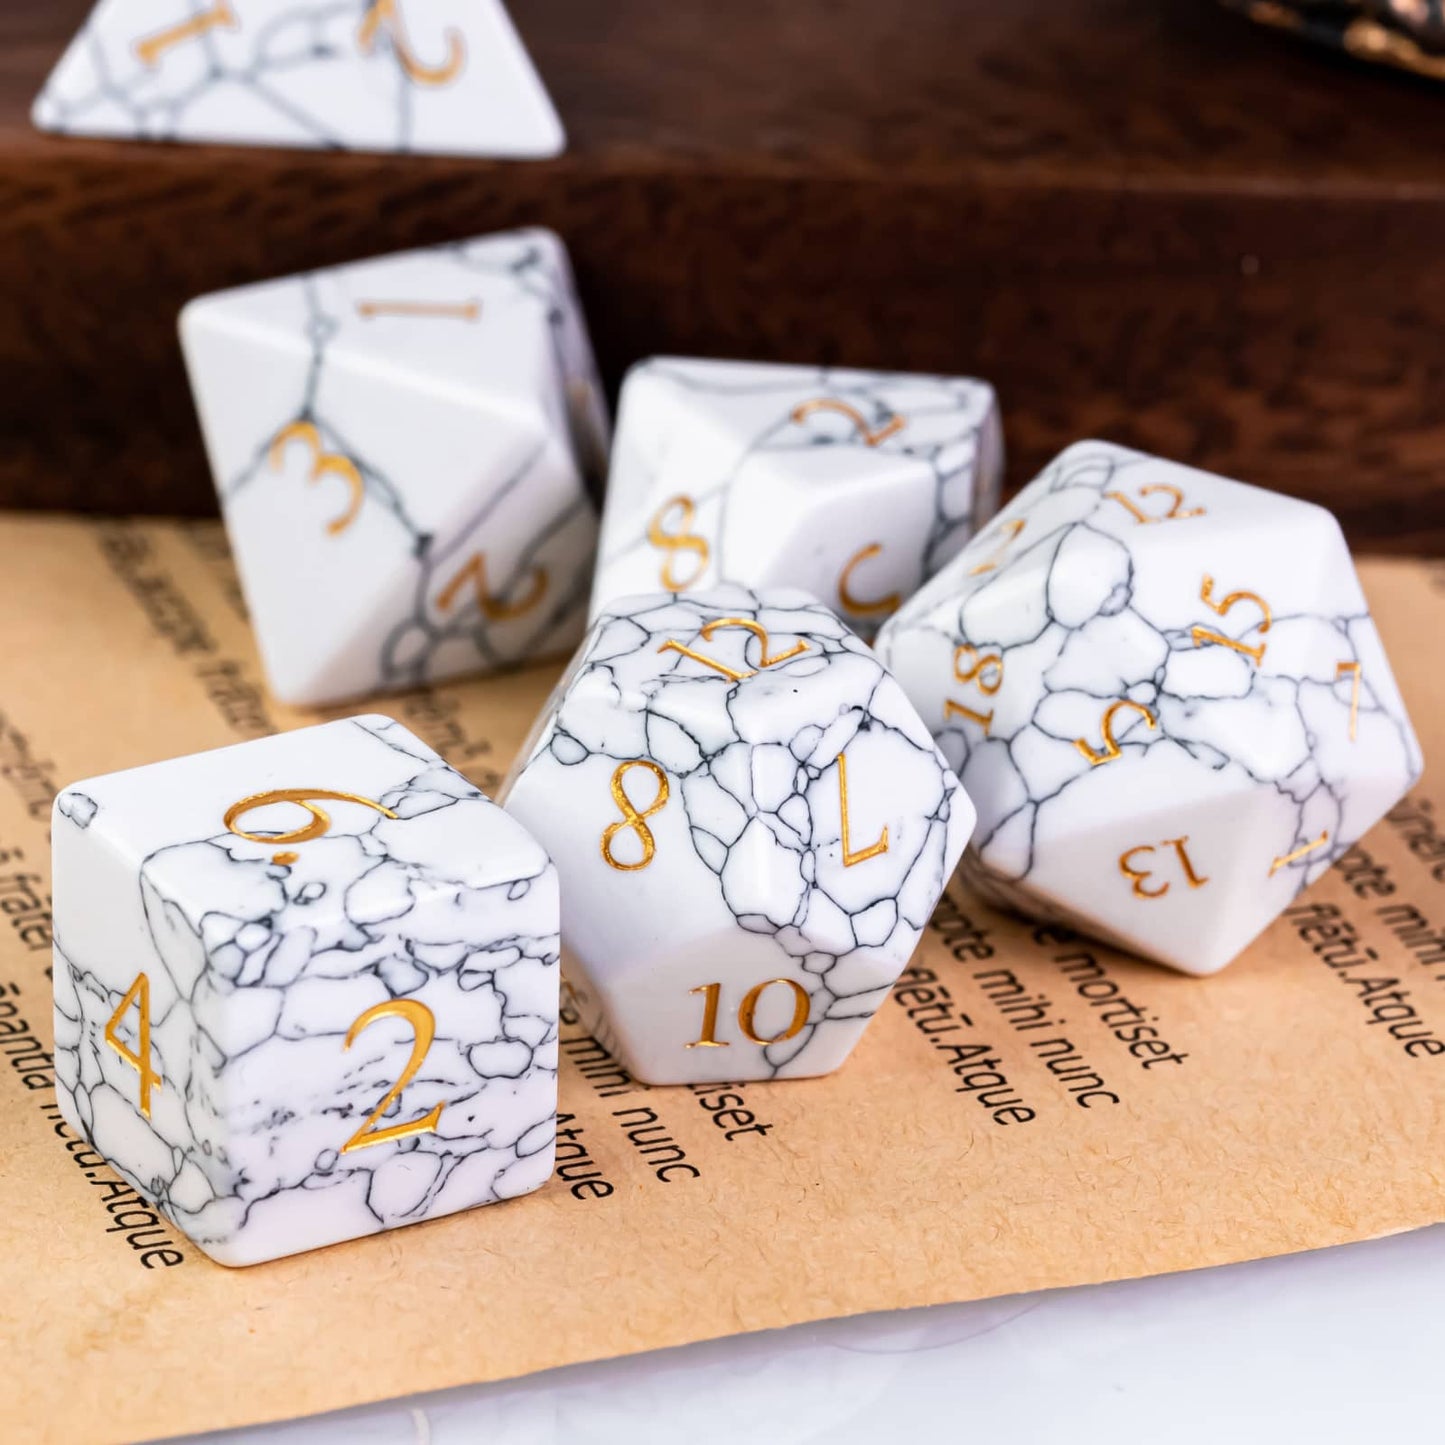 Cracked marble stone dice set sitting on page